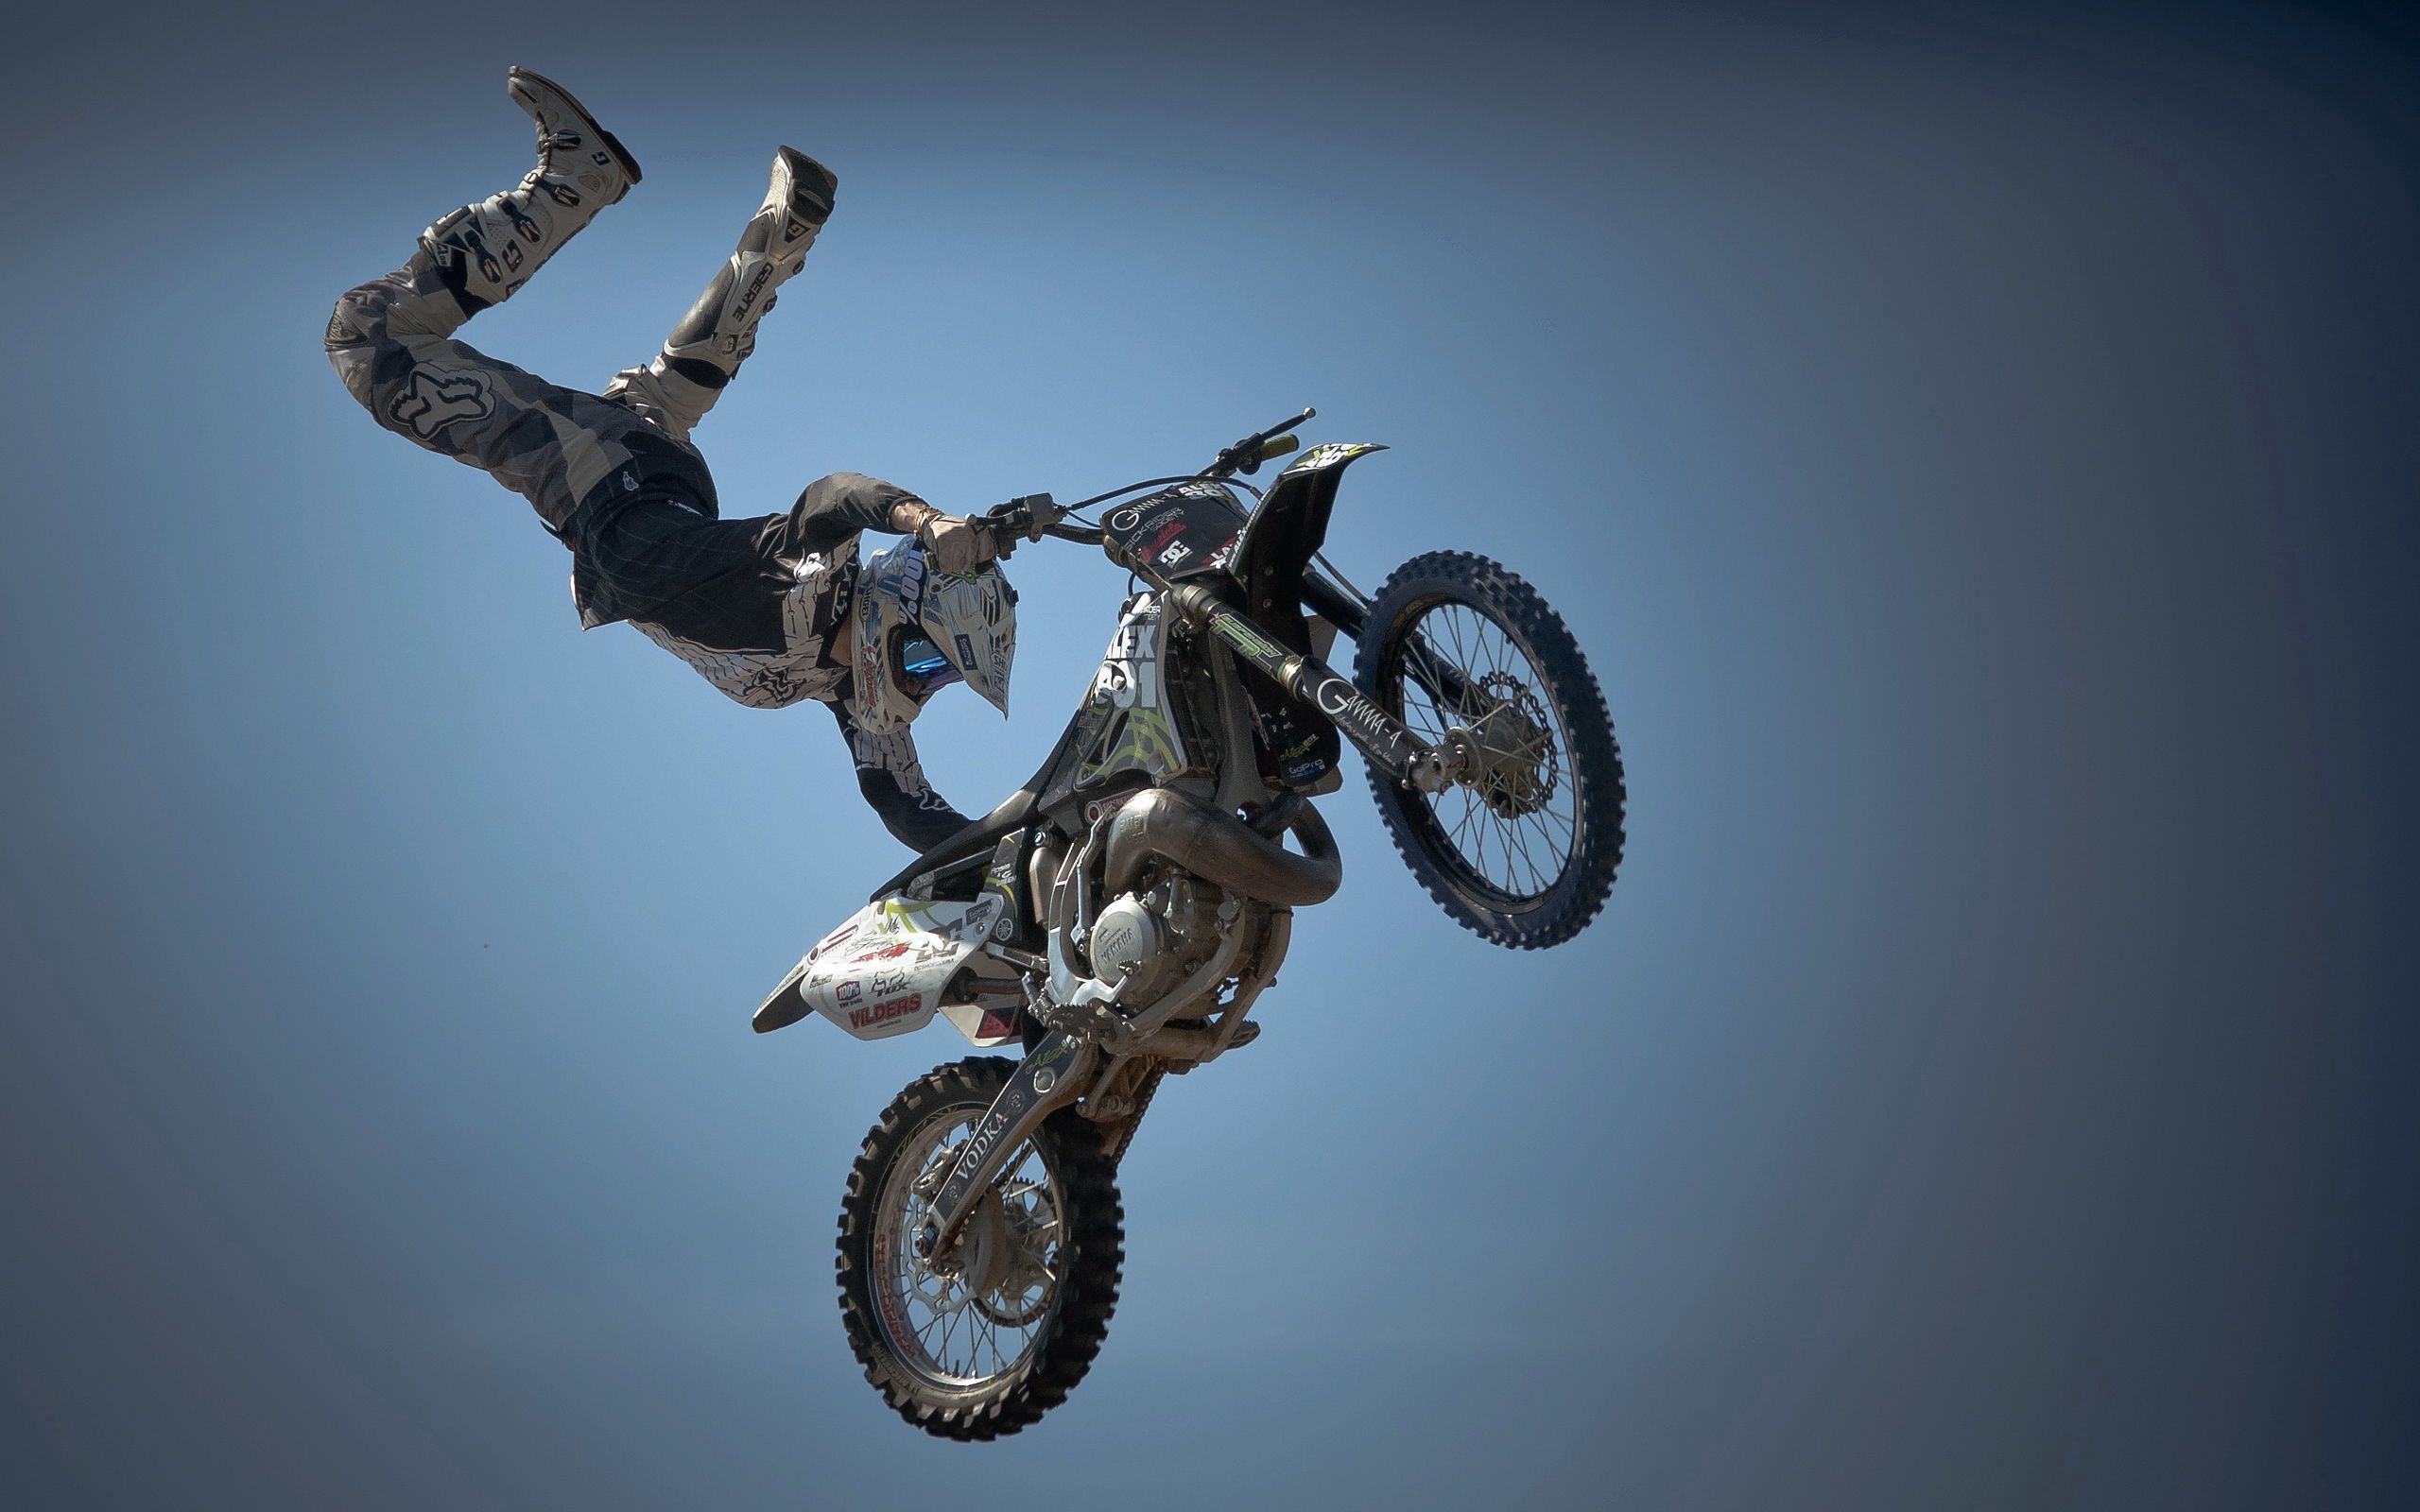 sports, motorcycles, motorcyclist, motorcycle, bounce, jump, trick